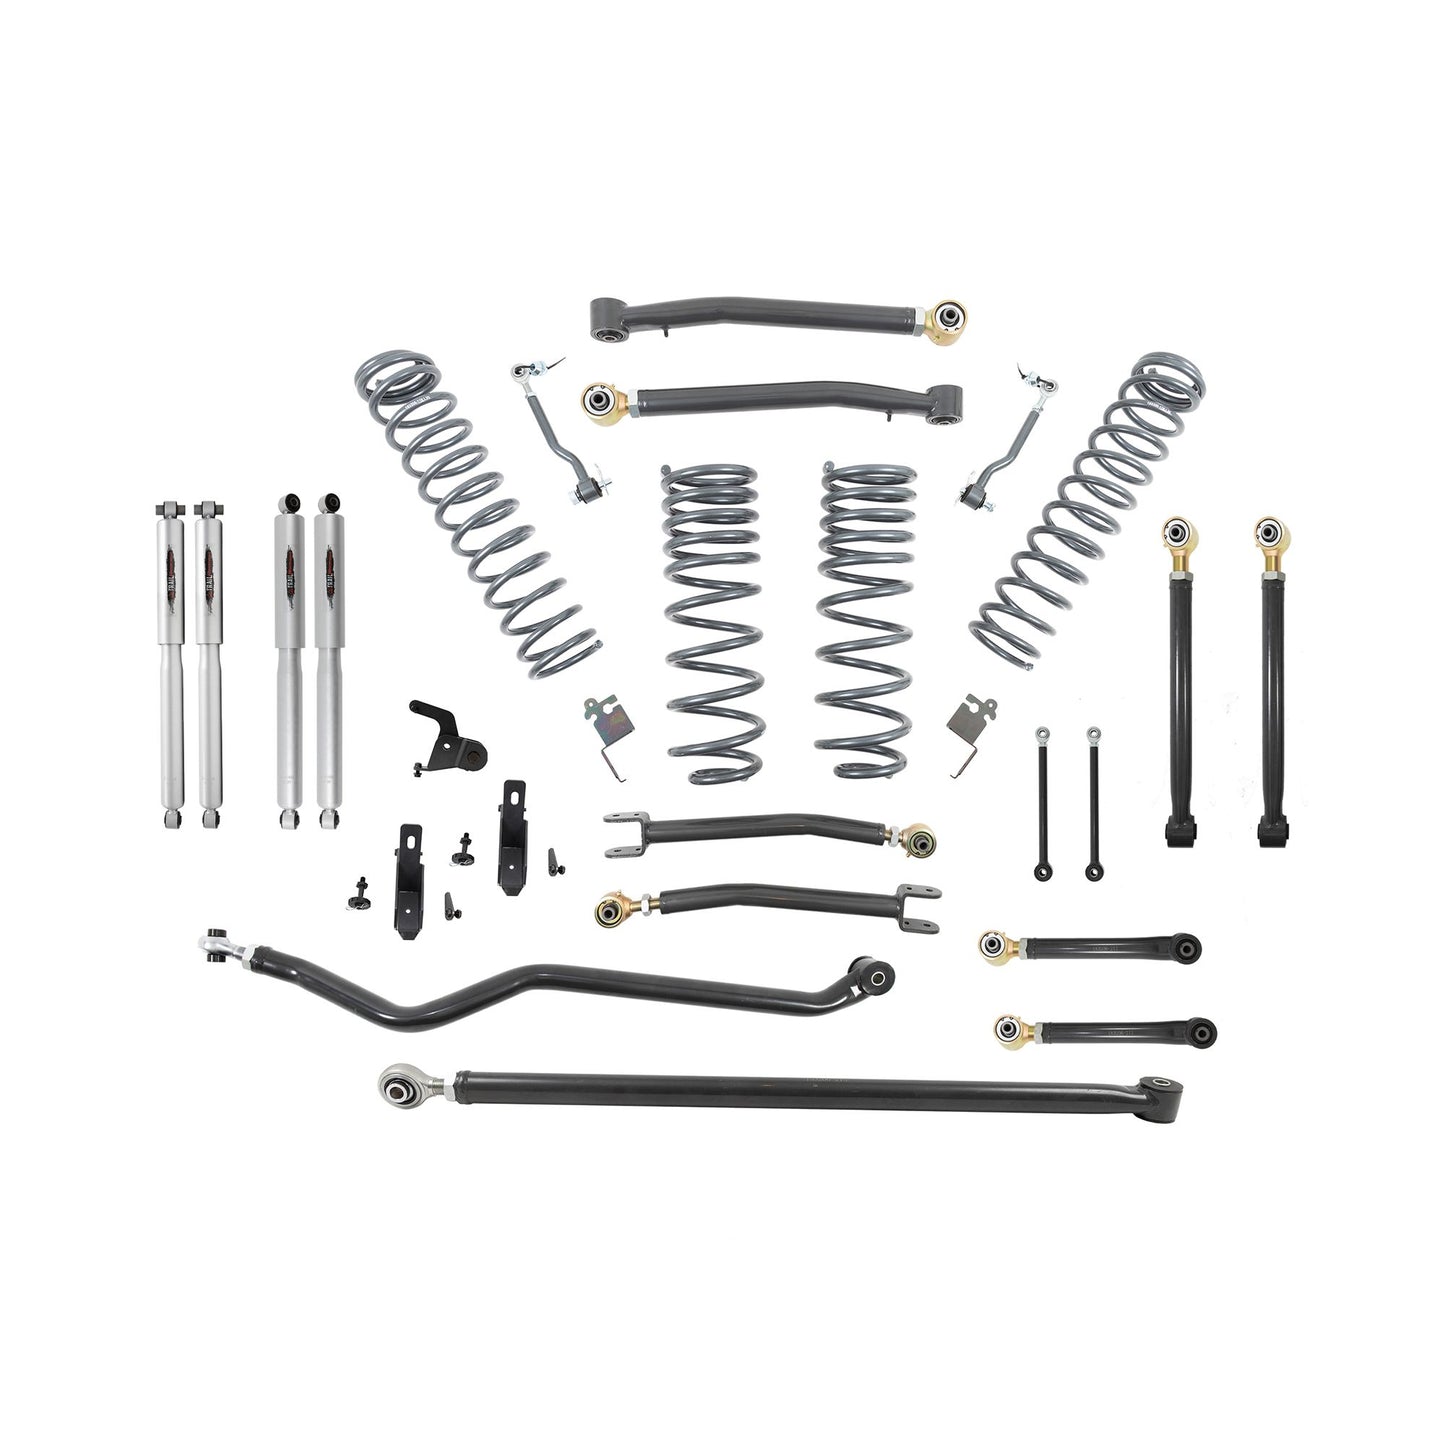 BELLTECH 153206TP LIFT KIT 4in. Lift Kit Inc. Front and Rear Trail Performance Struts/Shocks 2020-2021 Jeep Gladiator Rubicon JT 4dr 4in. Lift